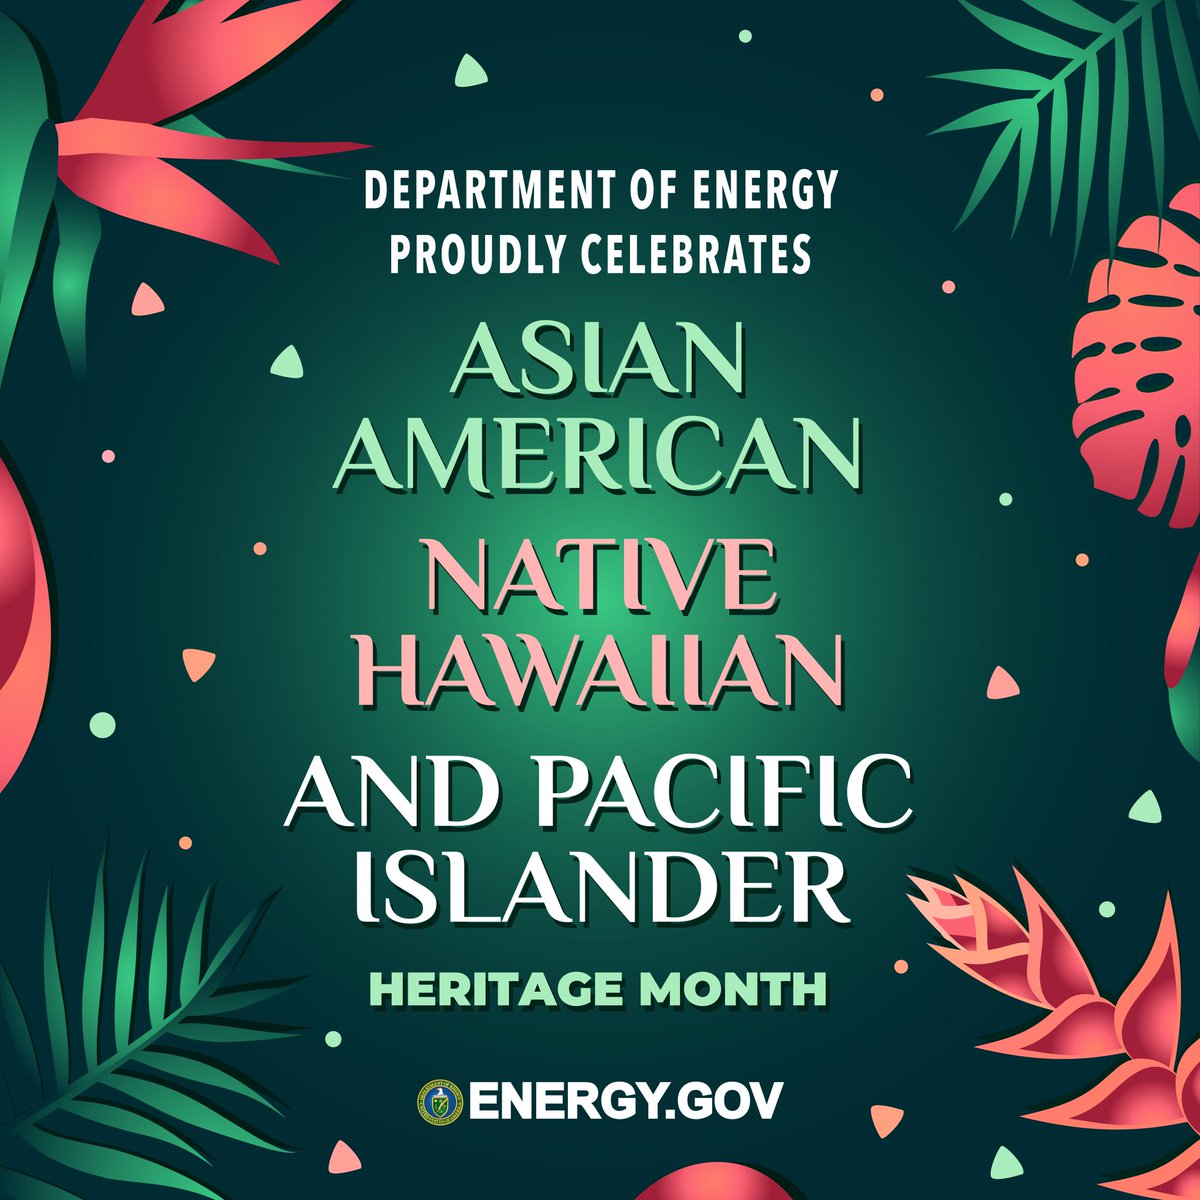 Happy Asian American, Native Hawaiian, and Pacific Islander Heritage Month! Today, and every day, we celebrate the lives and lasting legacy of our #AANHPI communities, whose contributions to the American story have helped shape our past, present, and future.